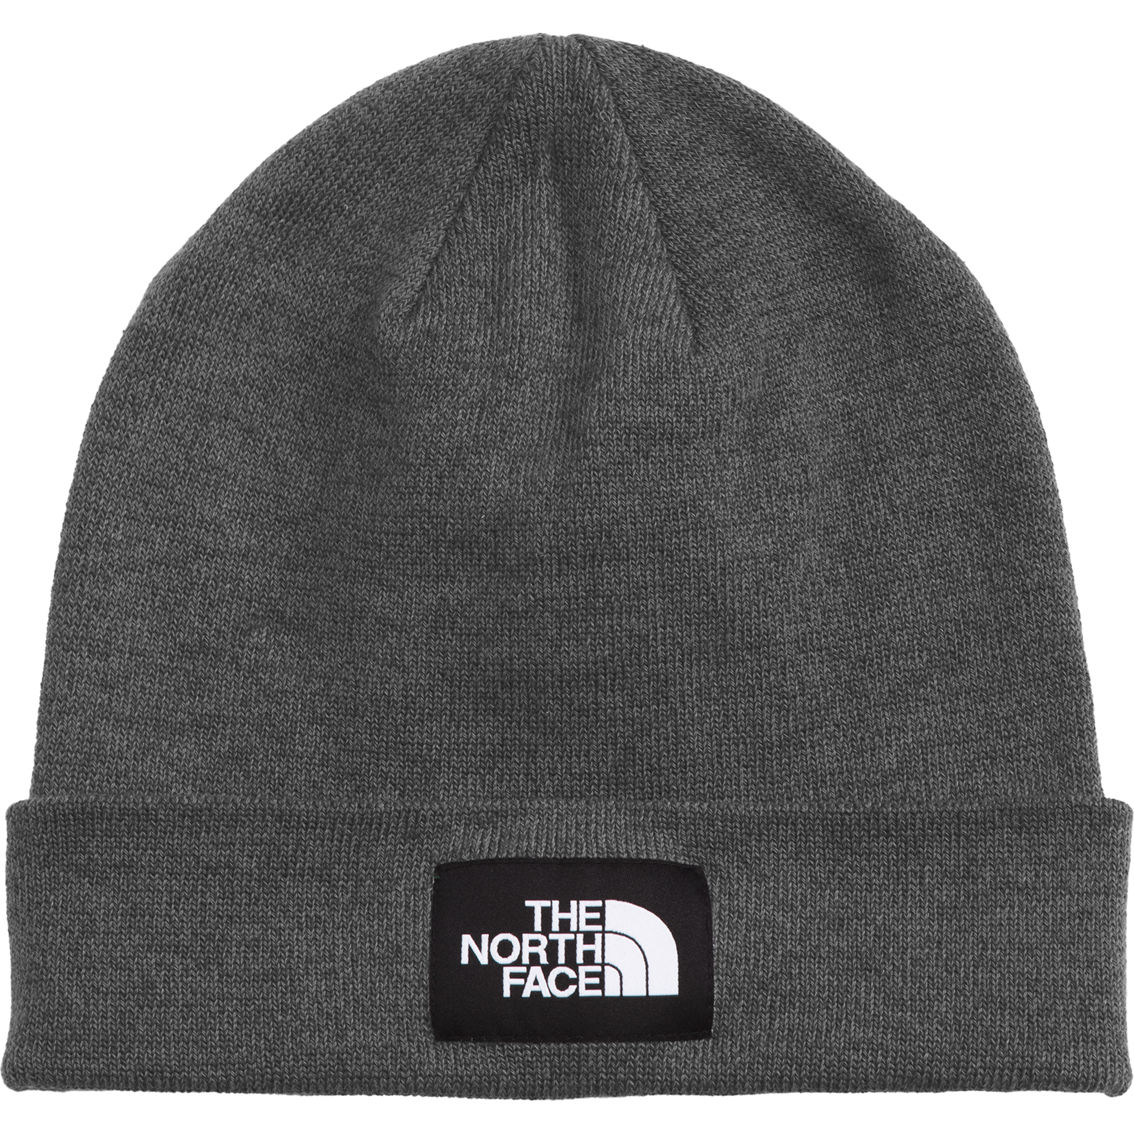 The North Face Dock Worker Beanie | Hats & Visors | Clothing ...